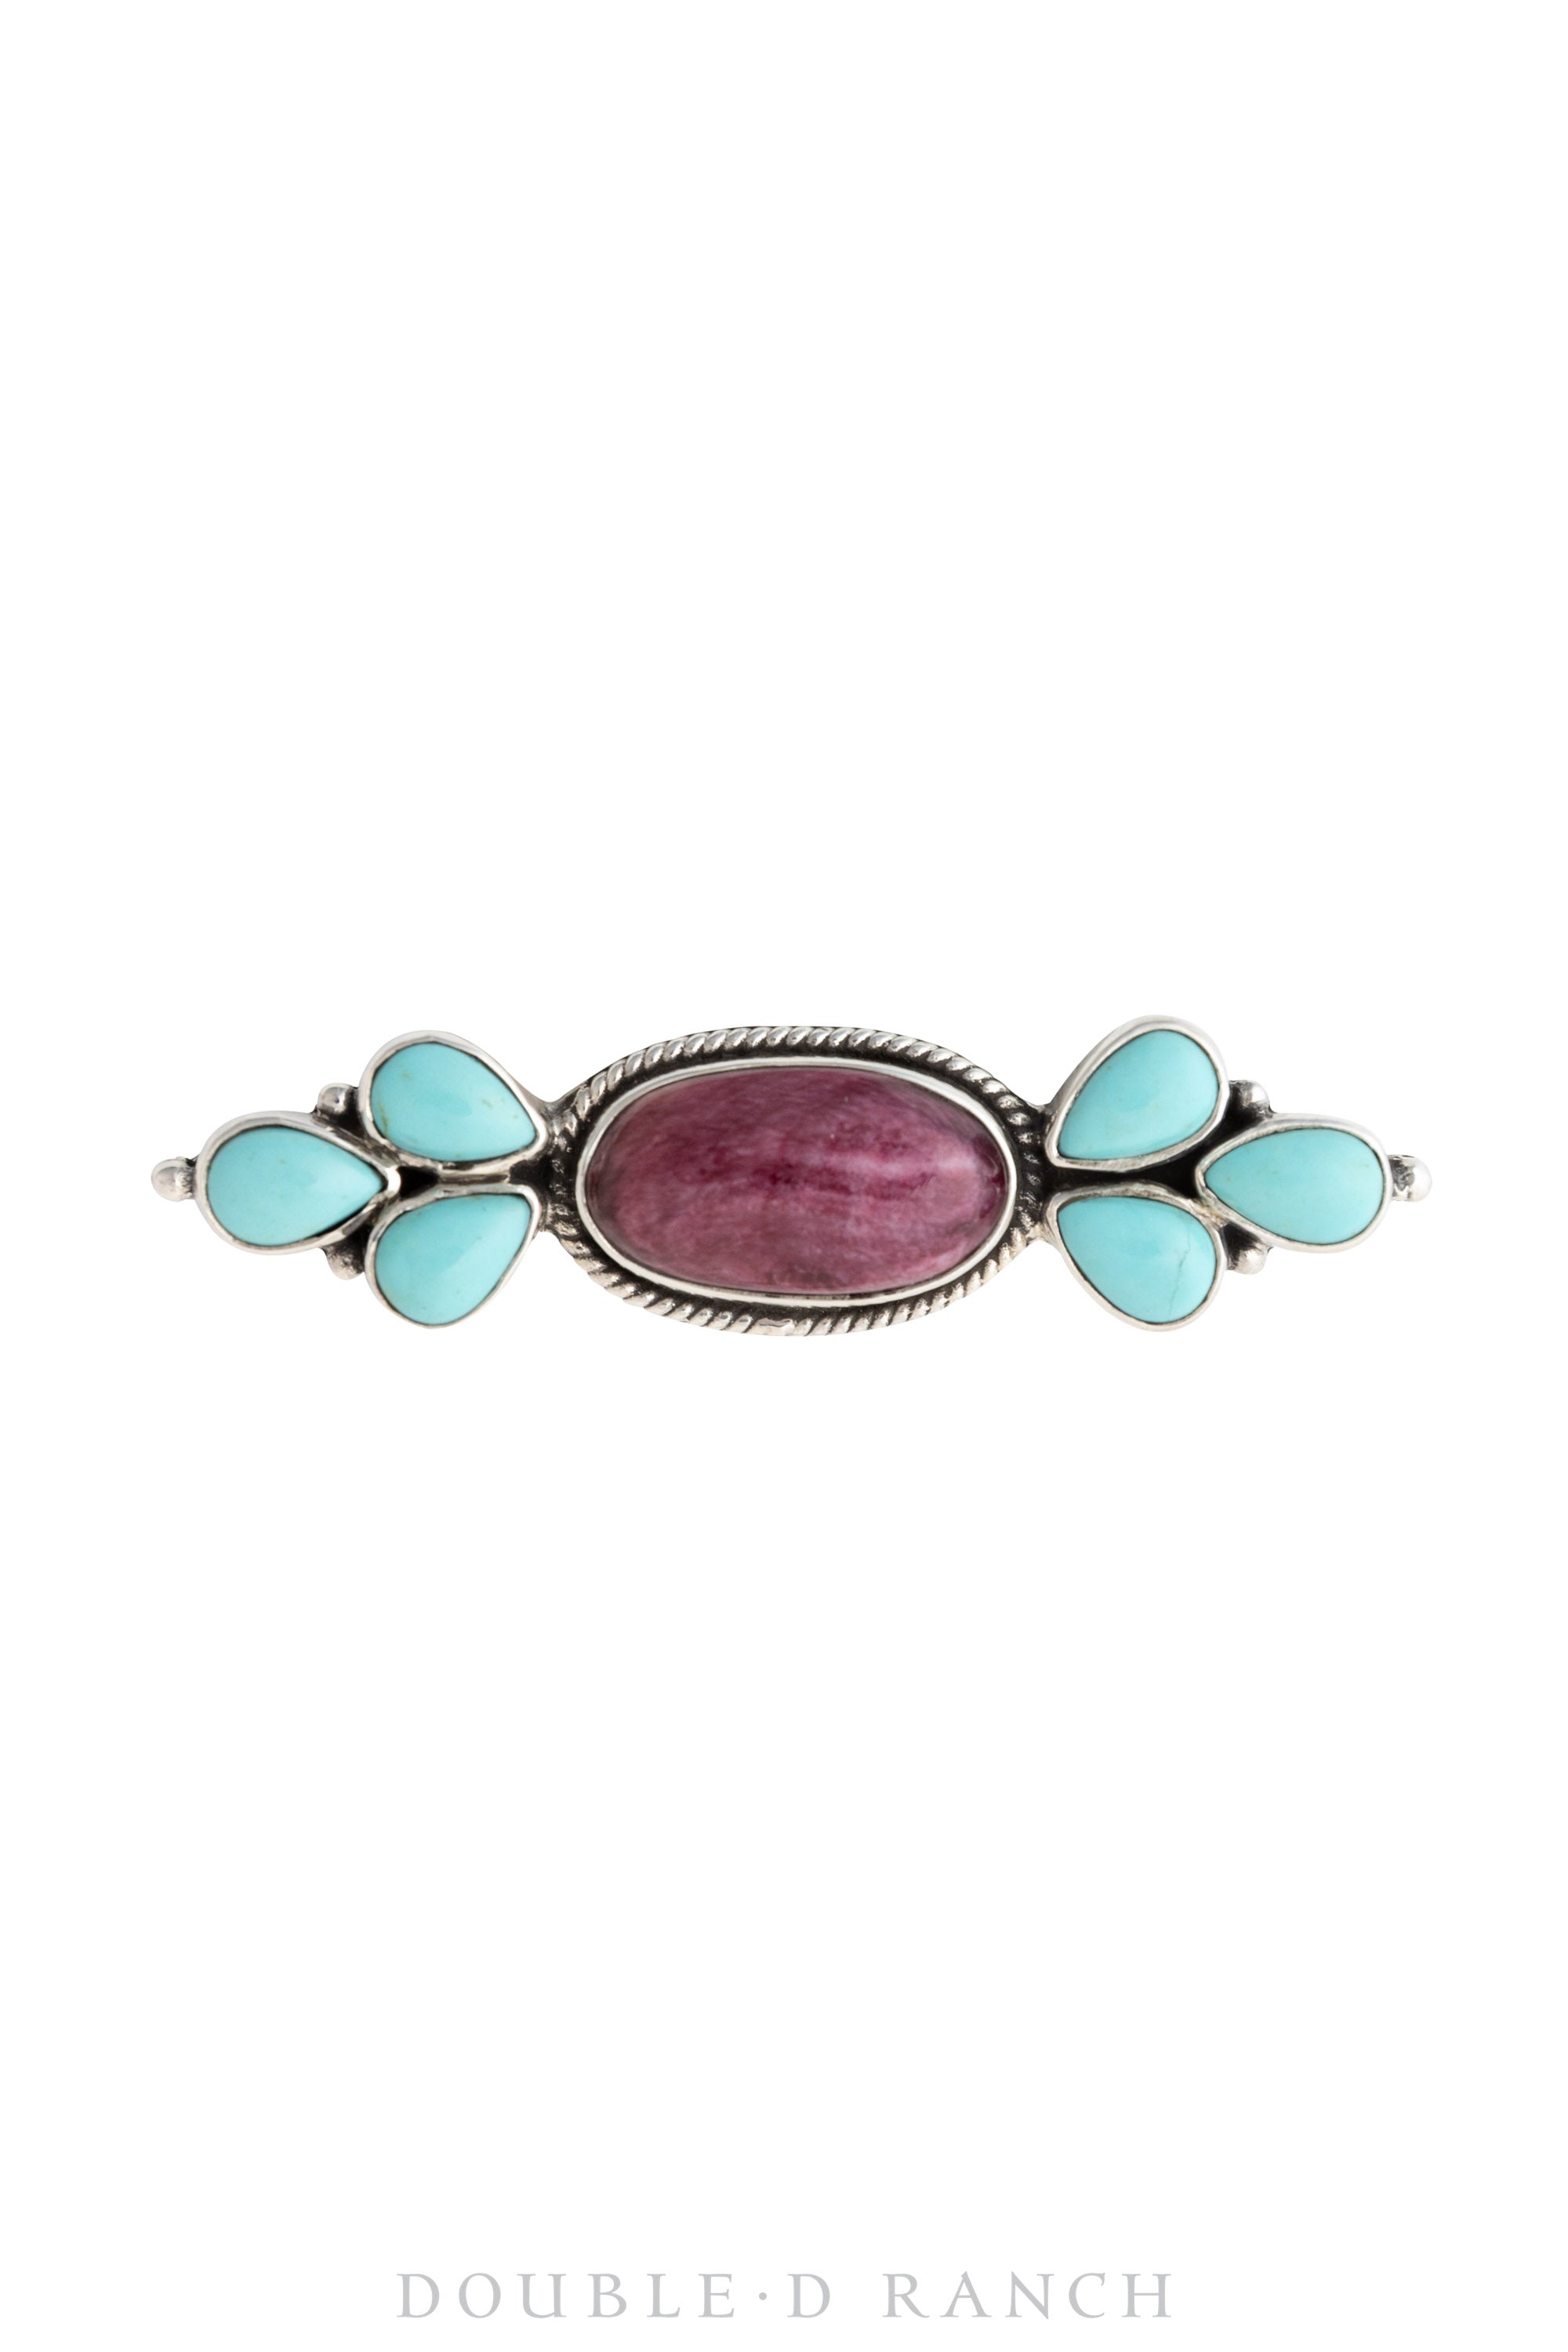 Pin, Bar, Turquoise & Purple Spiny Oyster, Contemporary, 876